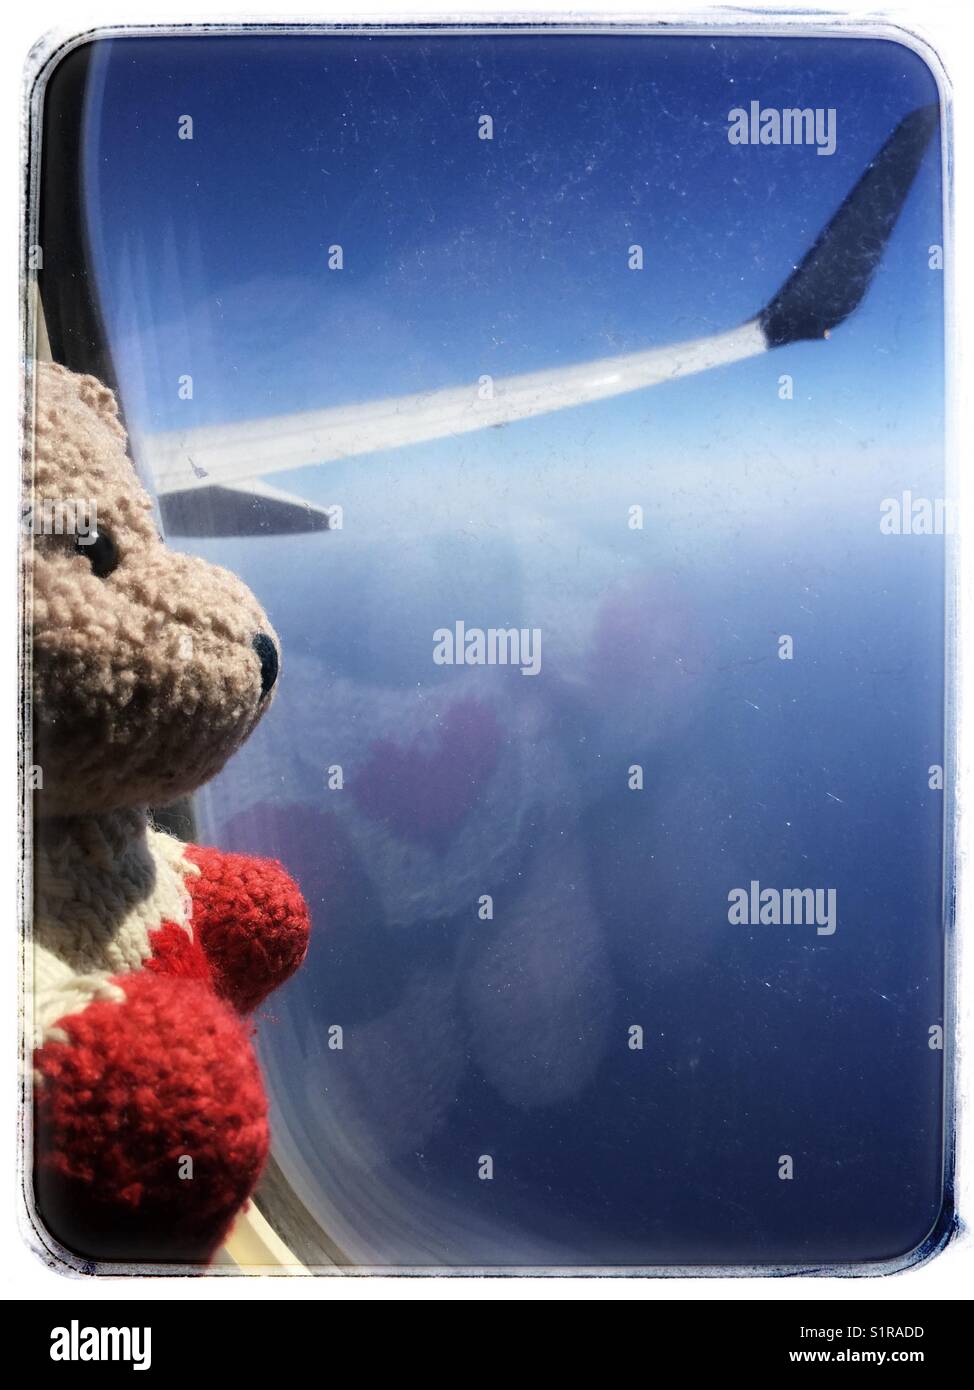 Stuffed bear looking out of a plane window during a flight. Stock Photo